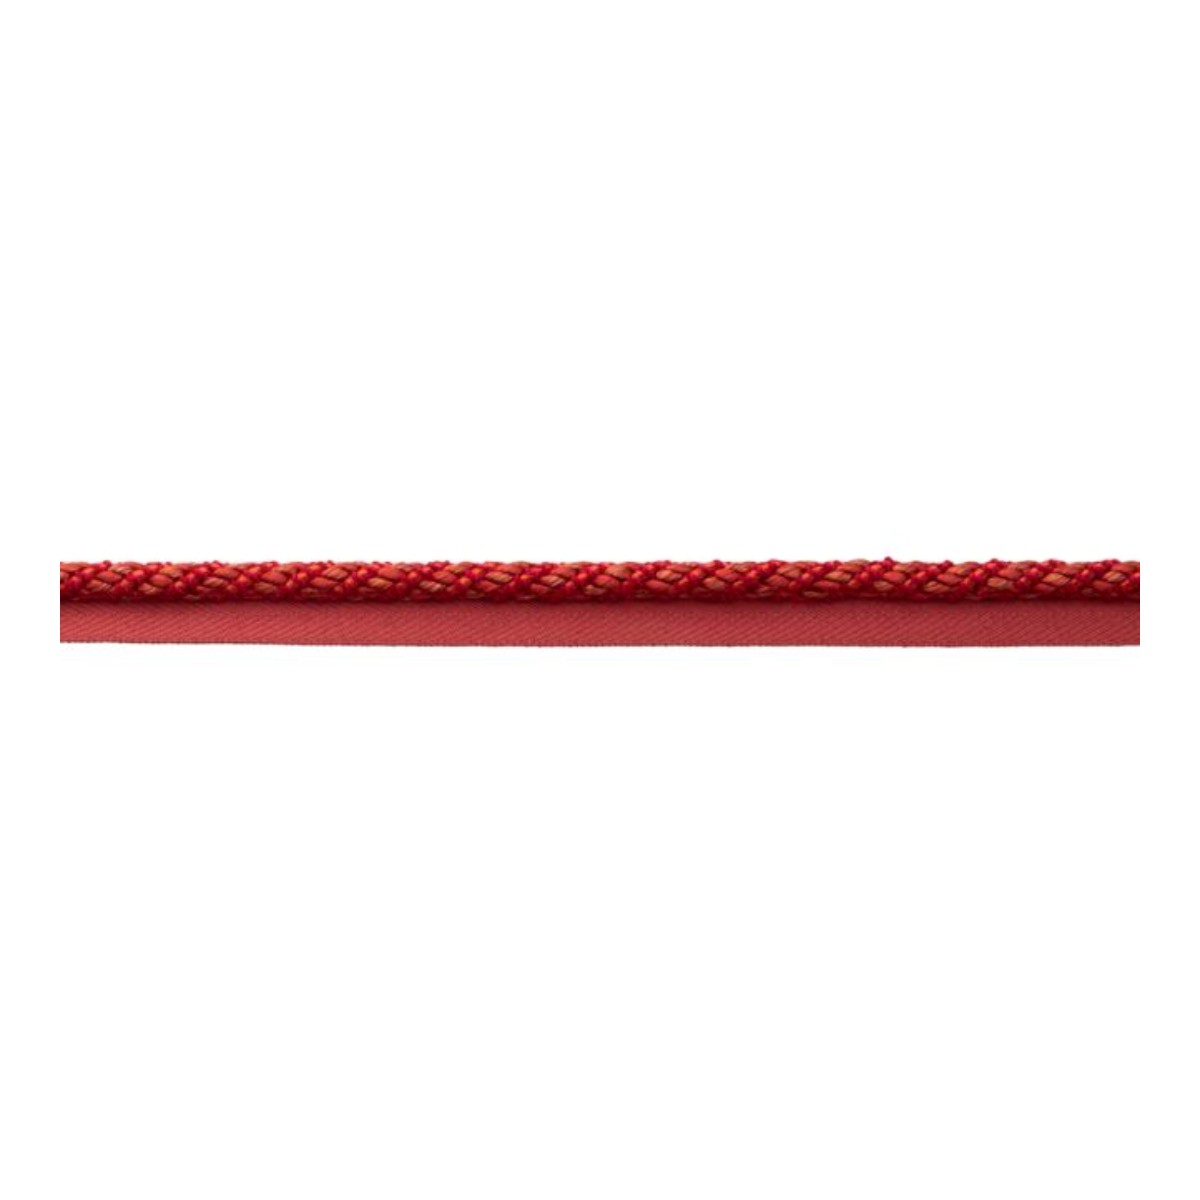 Samuel and Sons | Bagatelle Cord with Tape | Scarlet Rose